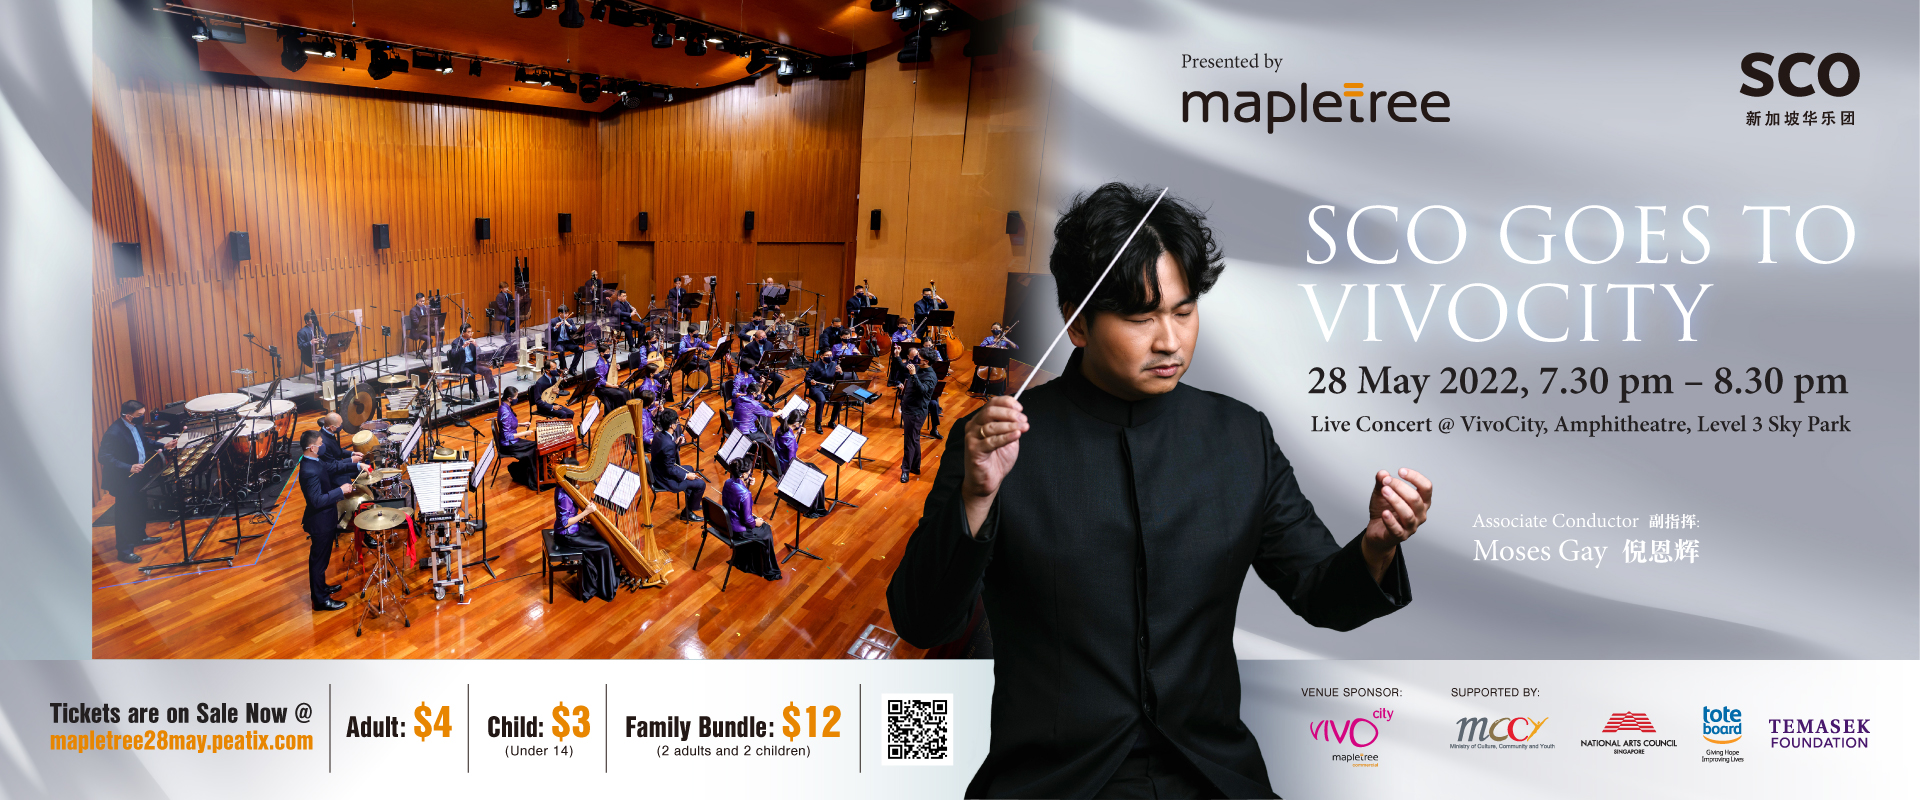 SCO_Mapletree_Concert_1920x800_3 All Concerts and Events